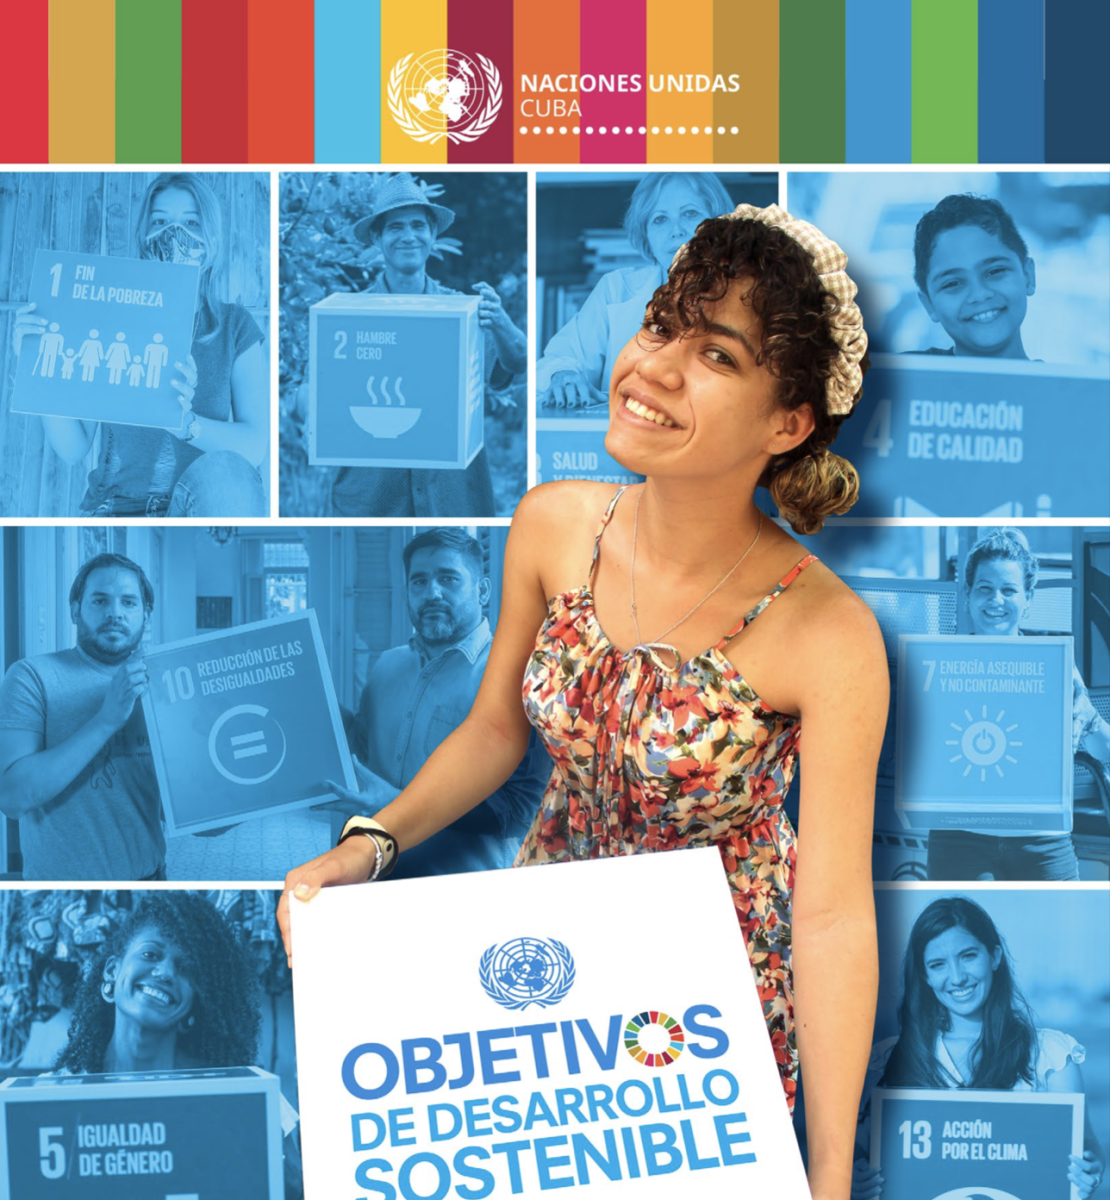 Publication cover with the SDGs symbols and the UN logo on top